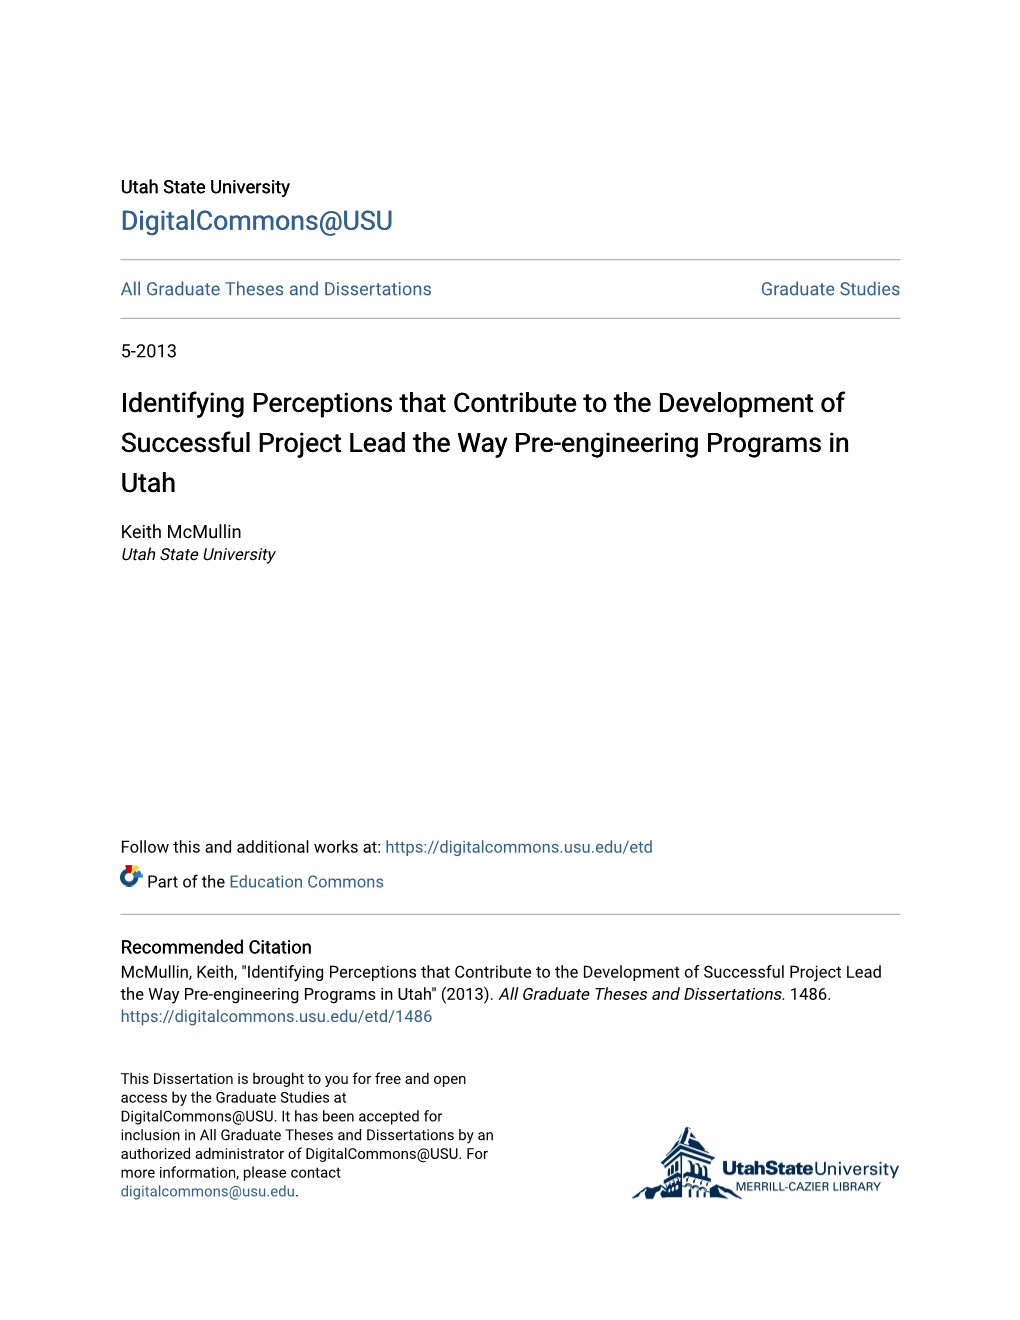 Identifying Perceptions That Contribute to the Development of Successful Project Lead the Way Pre-Engineering Programs in Utah